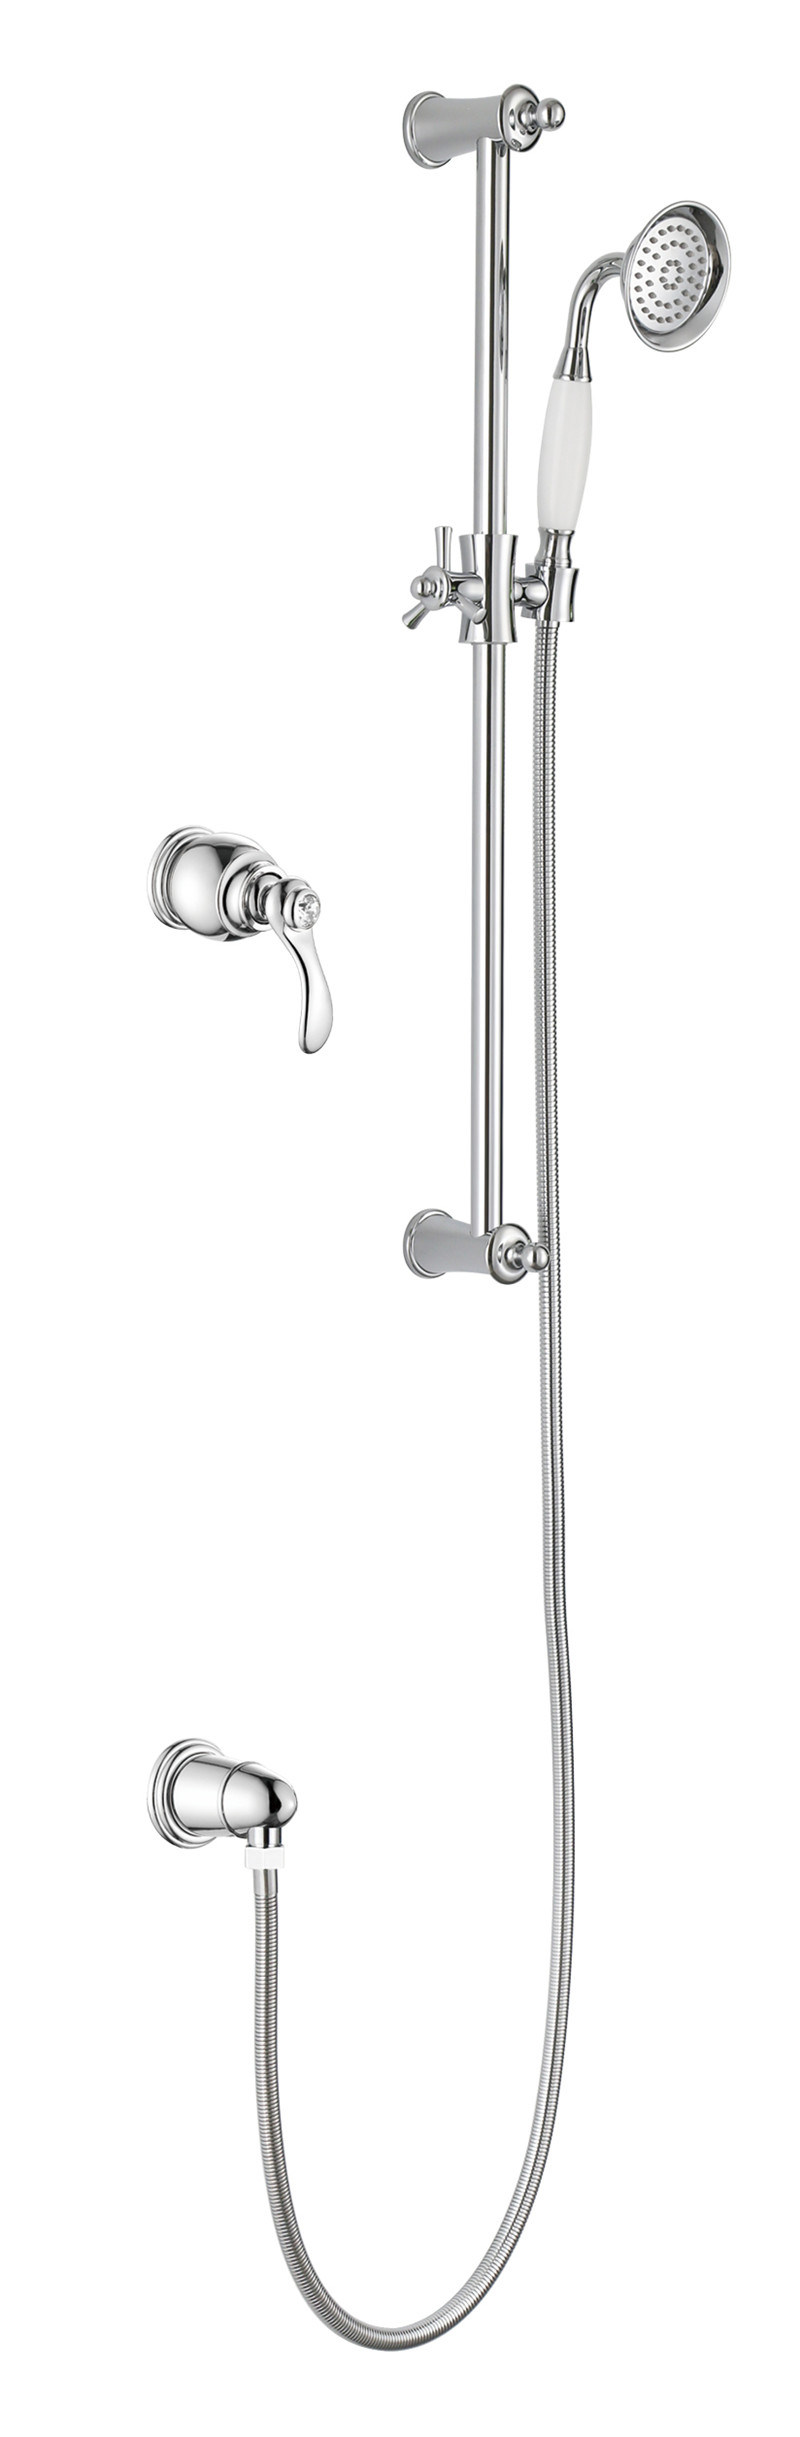 Wall Mounted Antique Brass Concealed Shower Set (zf-W67)